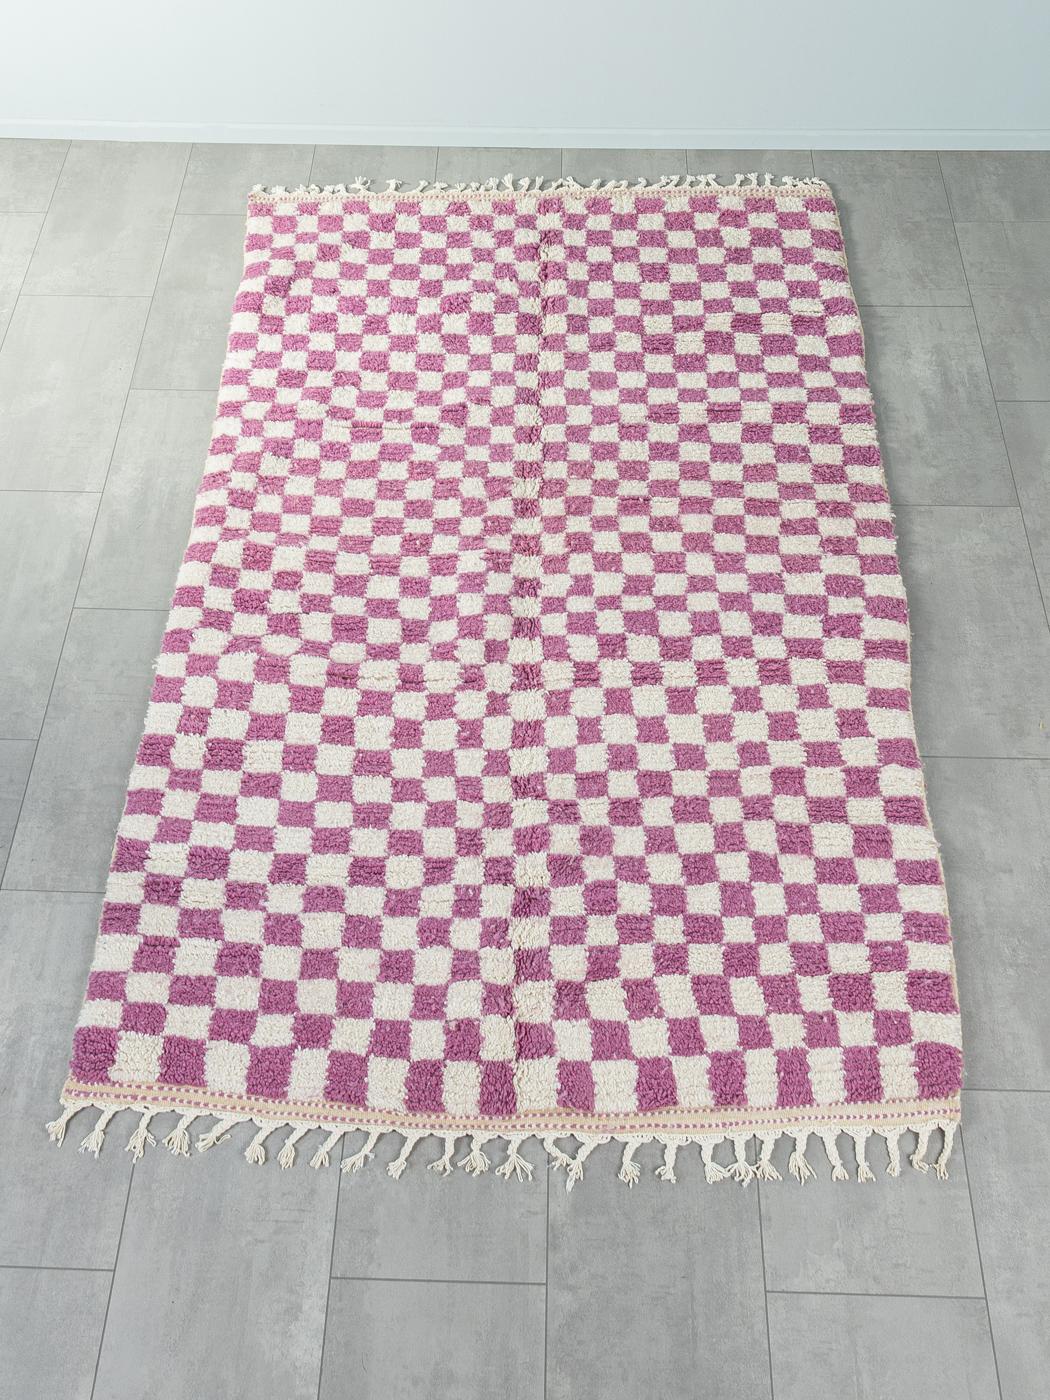 Berry check is a contemporary 100% wool rug – thick and soft, comfortable underfoot. Our Berber rugs are handwoven and handknotted by Amazigh women in the Atlas Mountains. These communities have been crafting rugs for thousands of years. One knot at